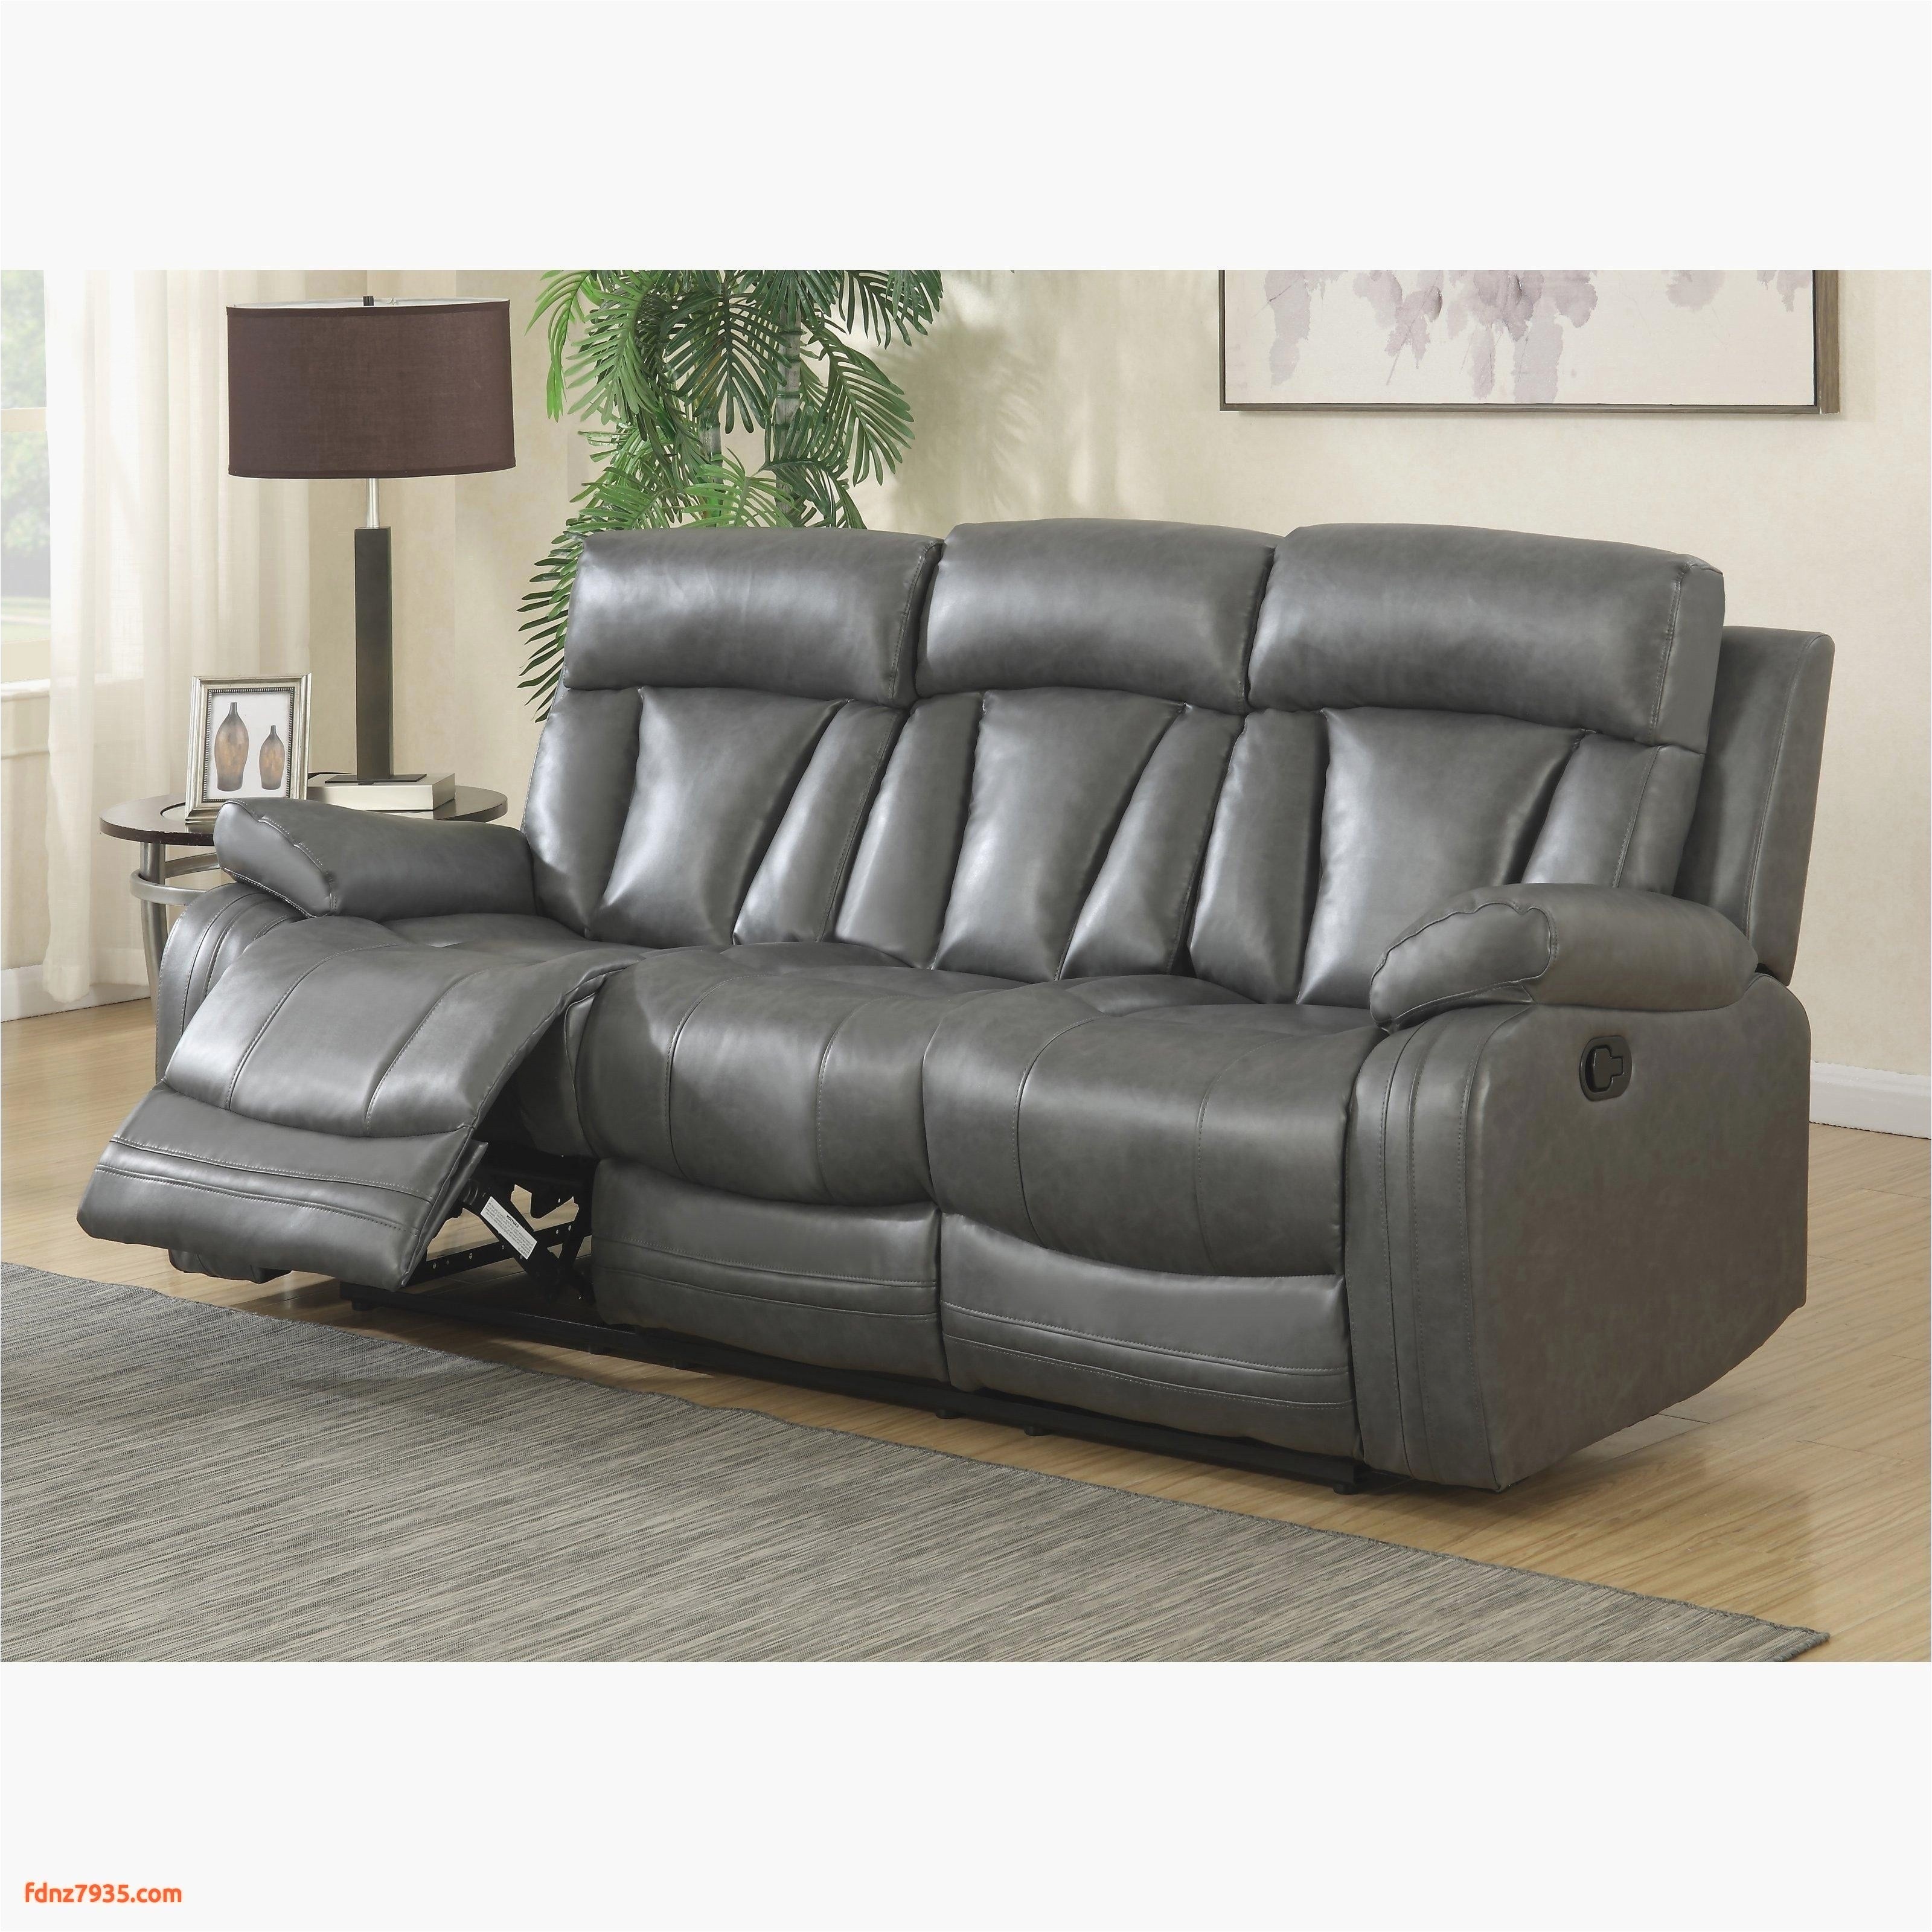 Best Place to Buy Leather sofa Sectional Leather sofa Bed Sectional Fresh sofa Design